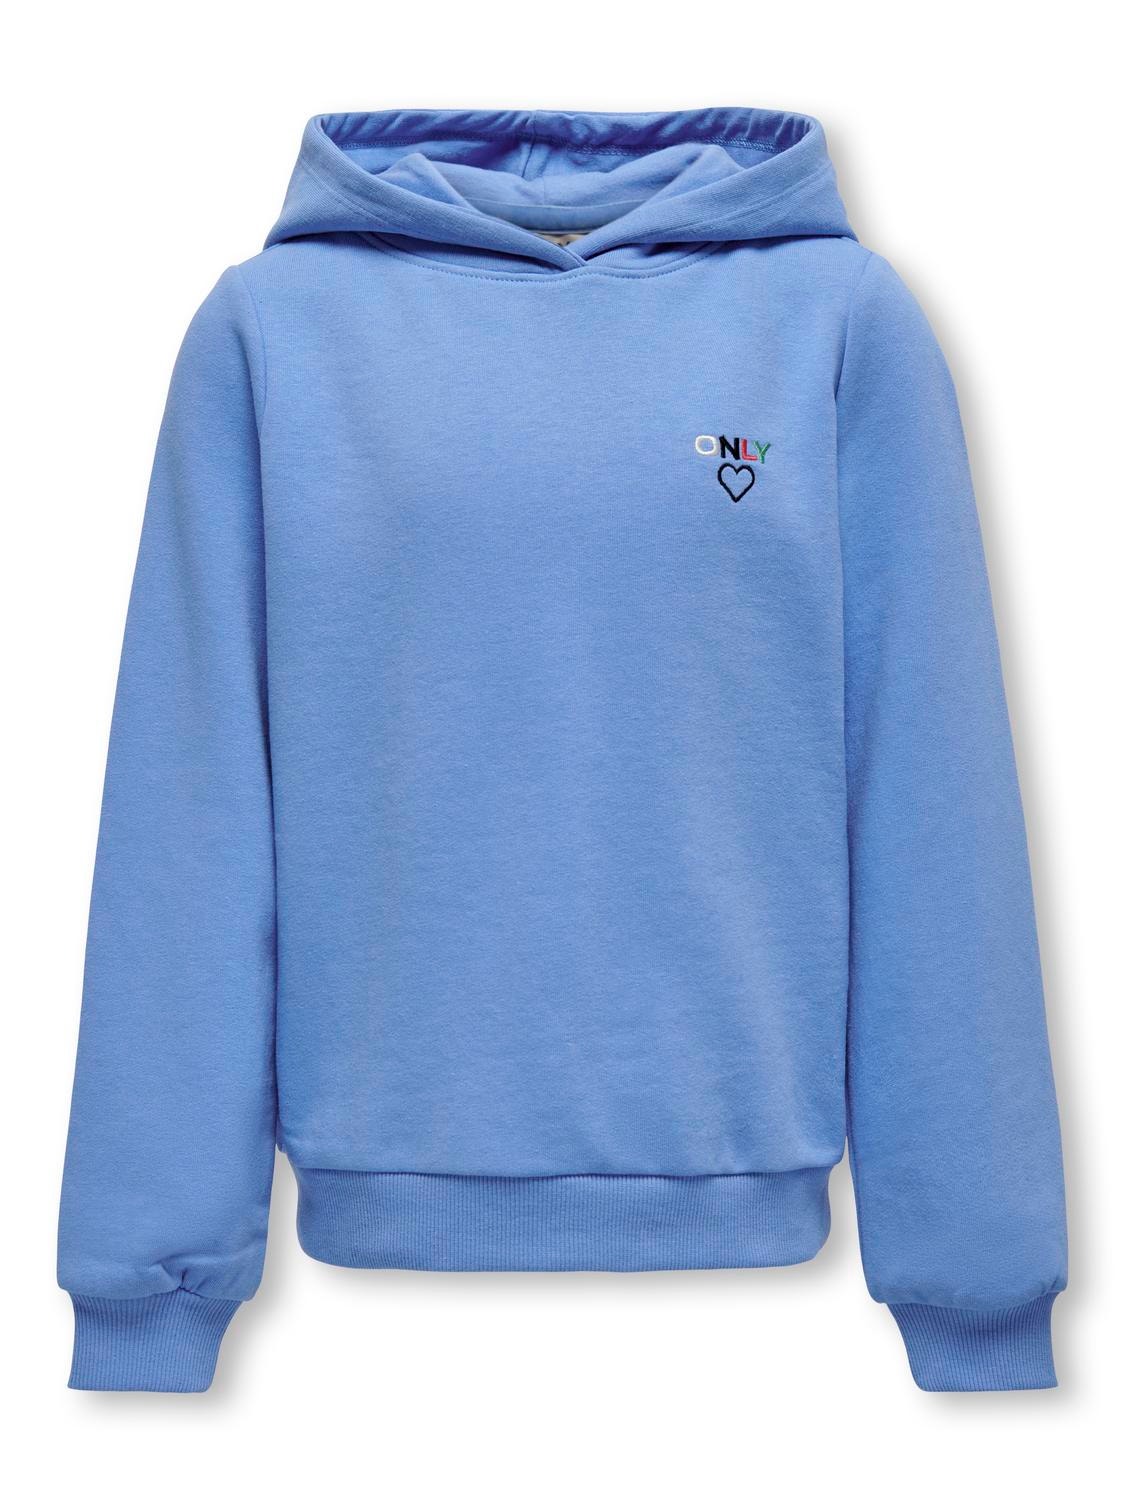 ONLY Normal passform Hoodie Sweatshirt -Provence - 15267765